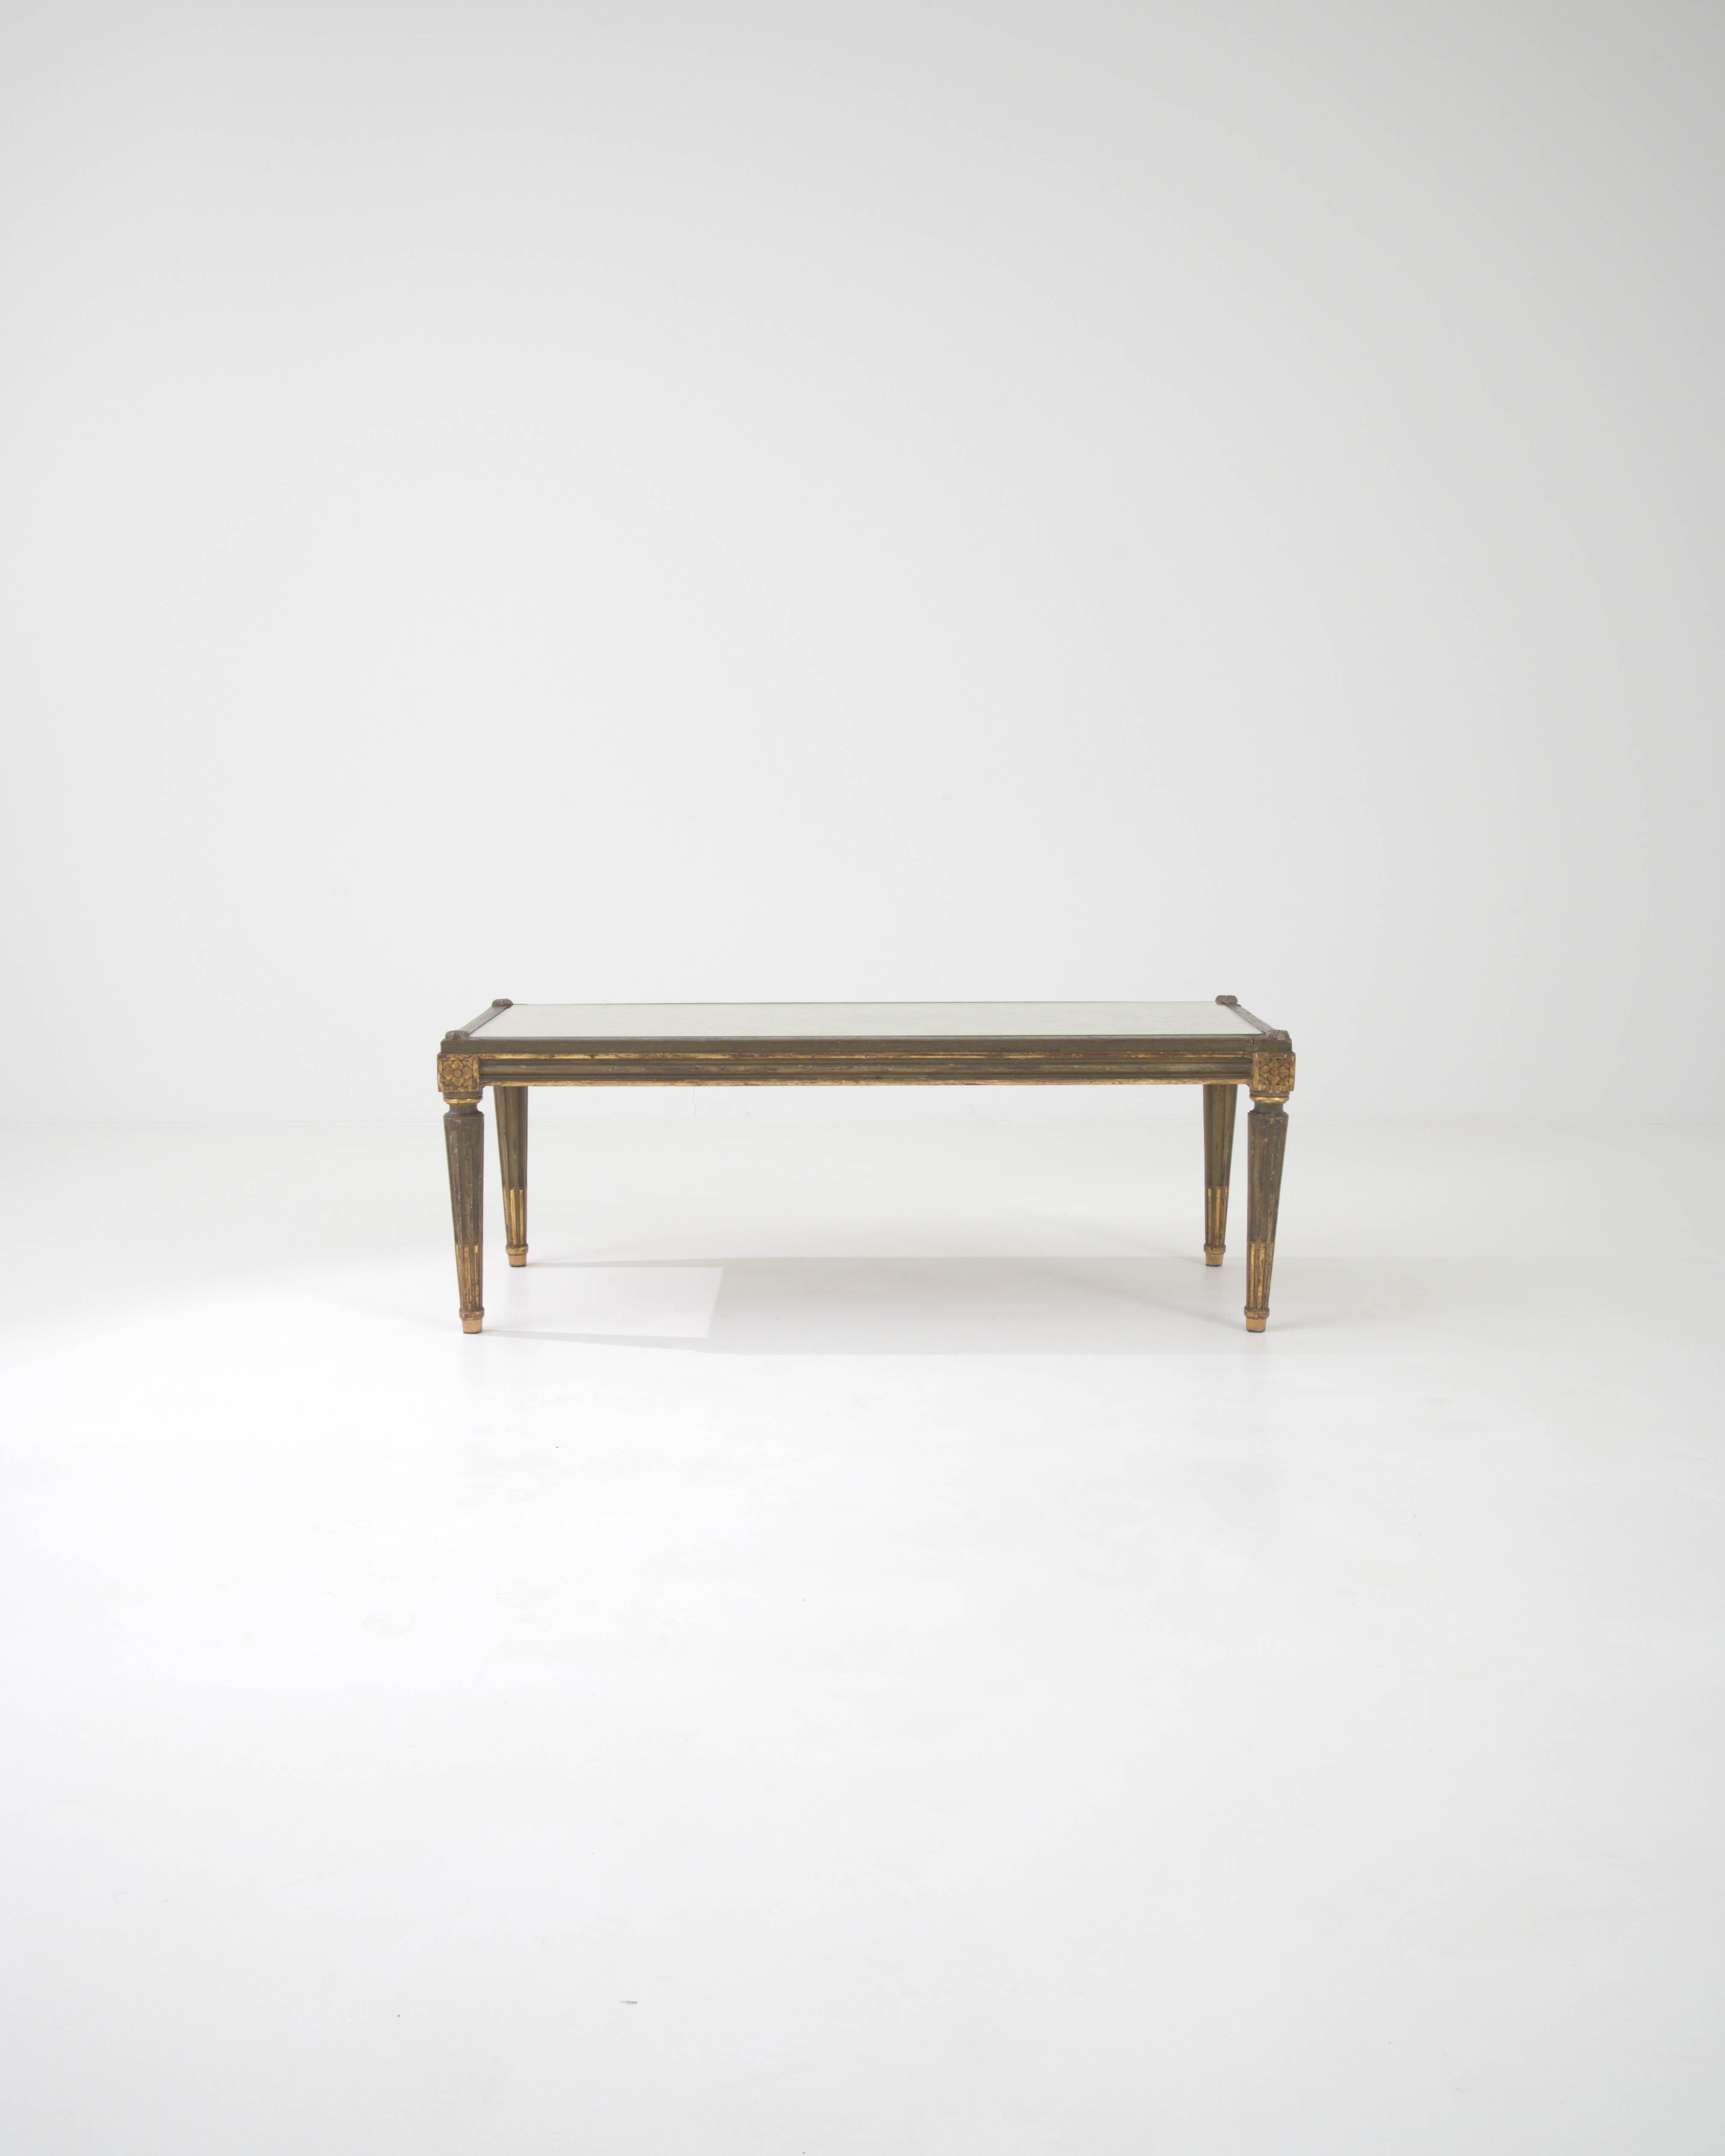 Presenting a masterpiece of early 20th-century French design, this exquisite wooden coffee table marries the rustic charm of its wood frame with the refined elegance of a glass top. The table's legs, adorned with delicate floral carvings, rise to